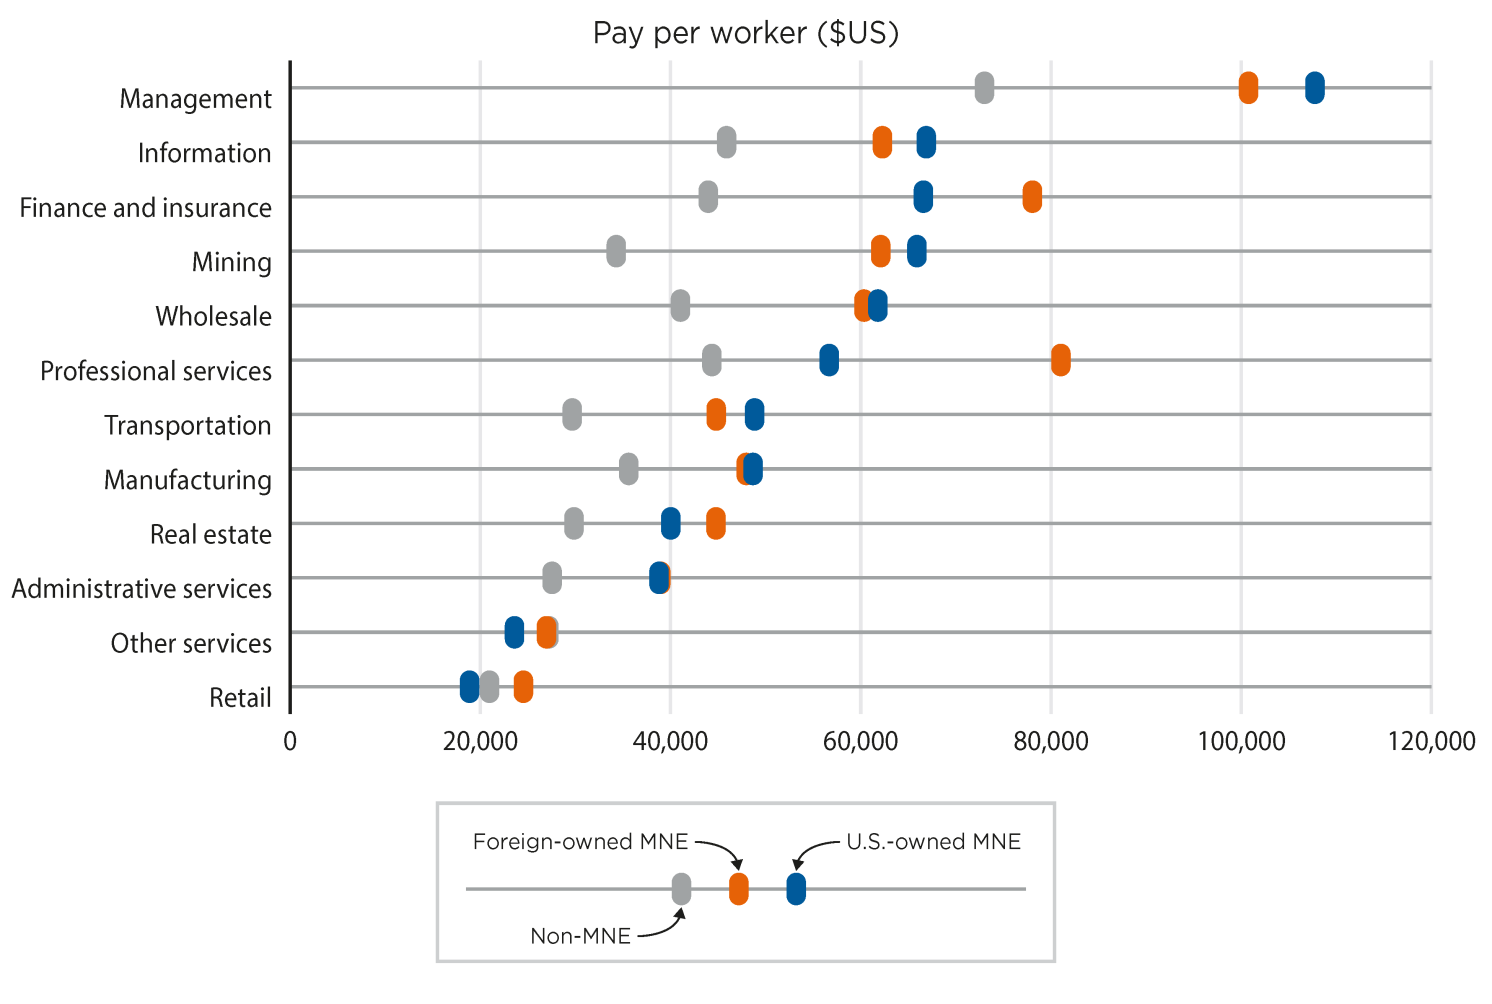 Figure 3 Average pay per worker by sector and multinational status